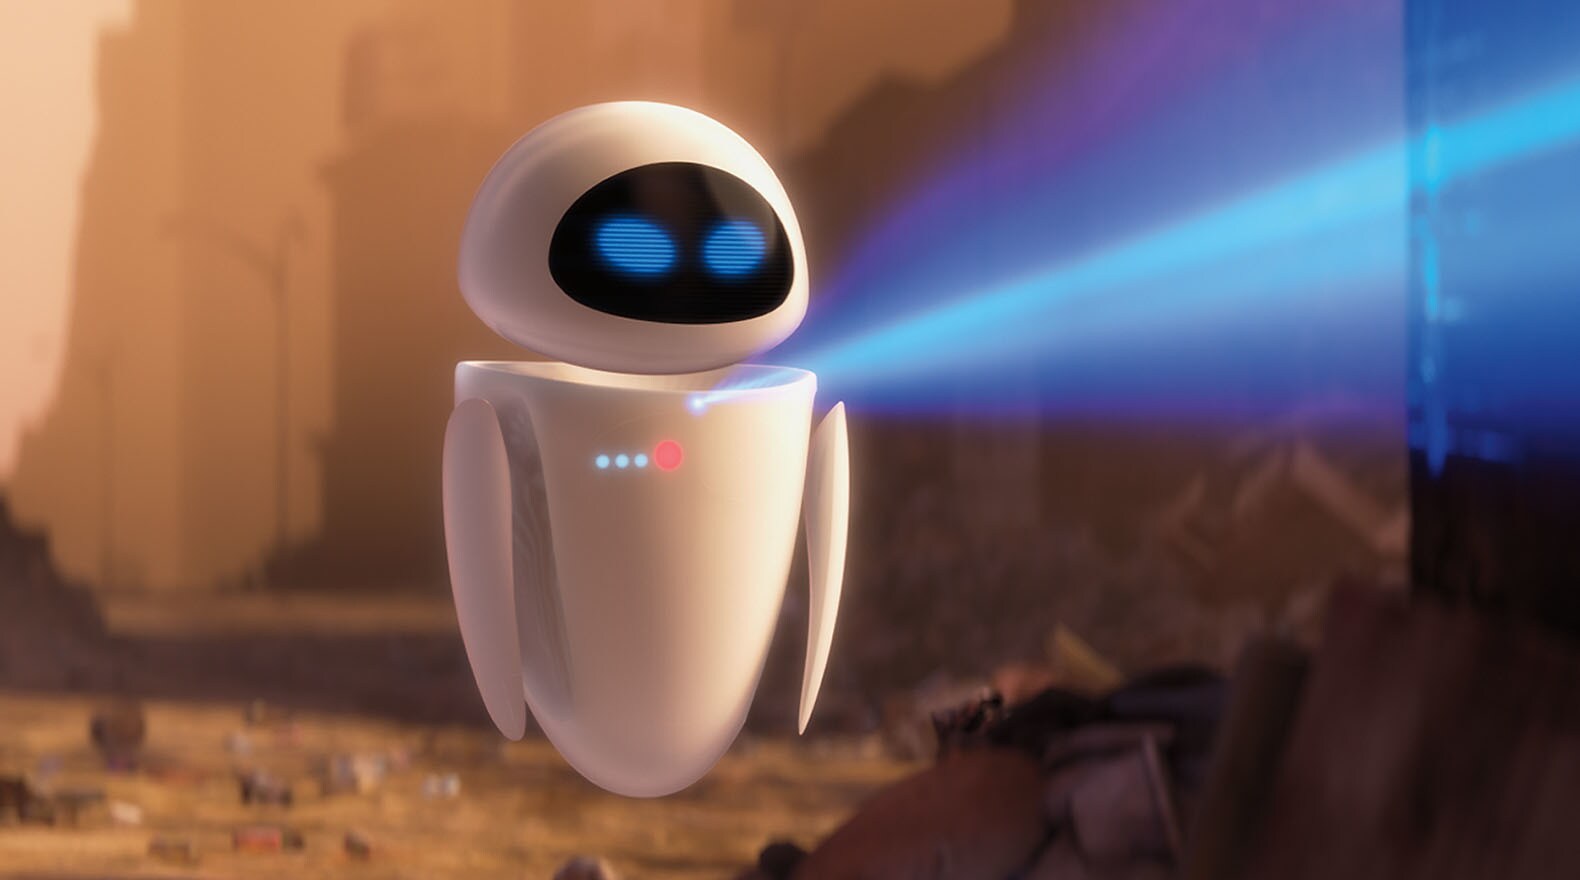 EVE is laser-focused on her job, from the movie "Wall-E"